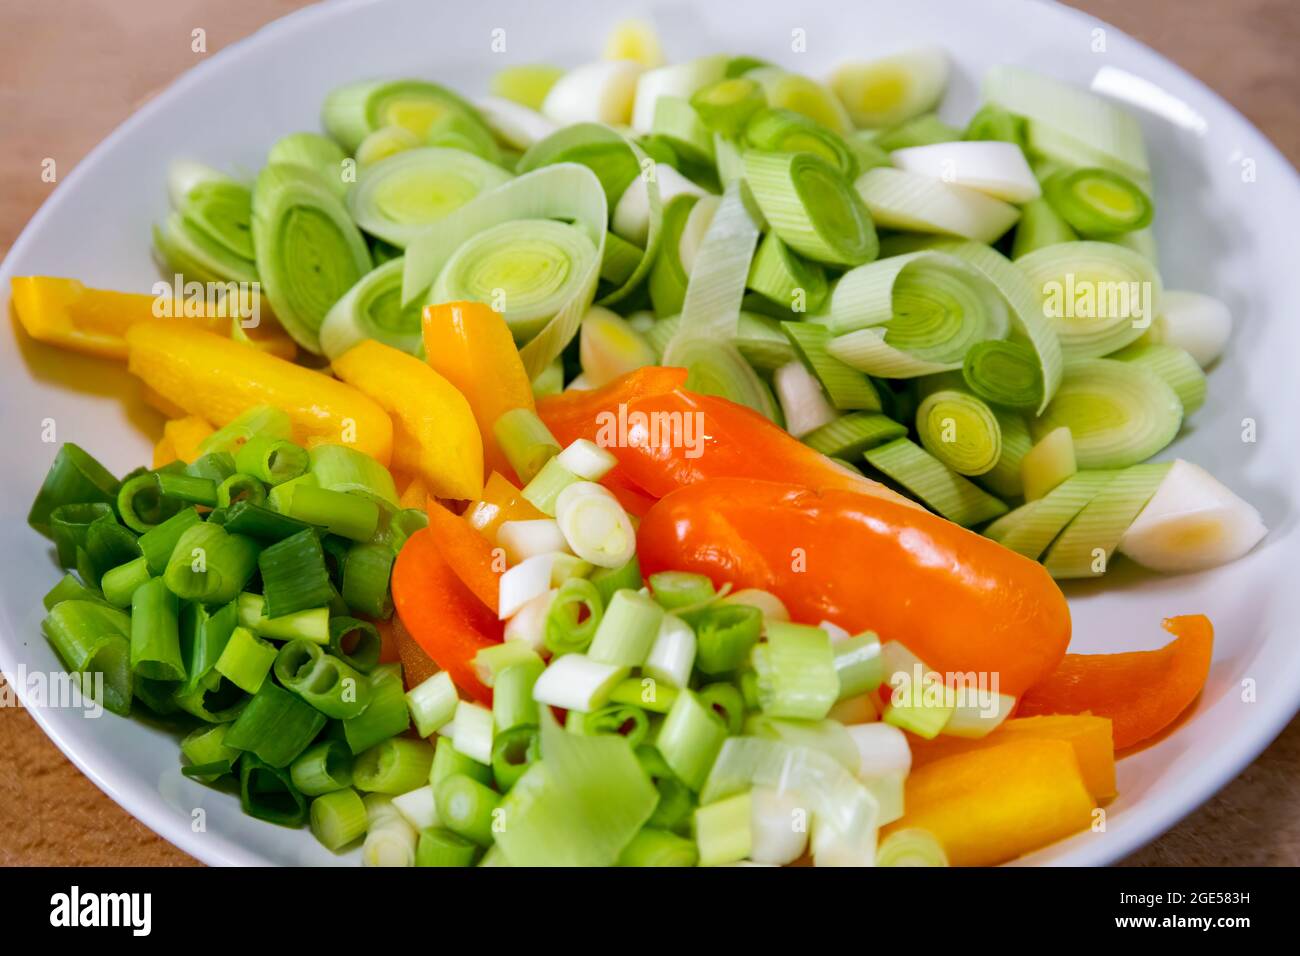 Sliced leeks, peppers and spring onions in a white bowl Stock Photo